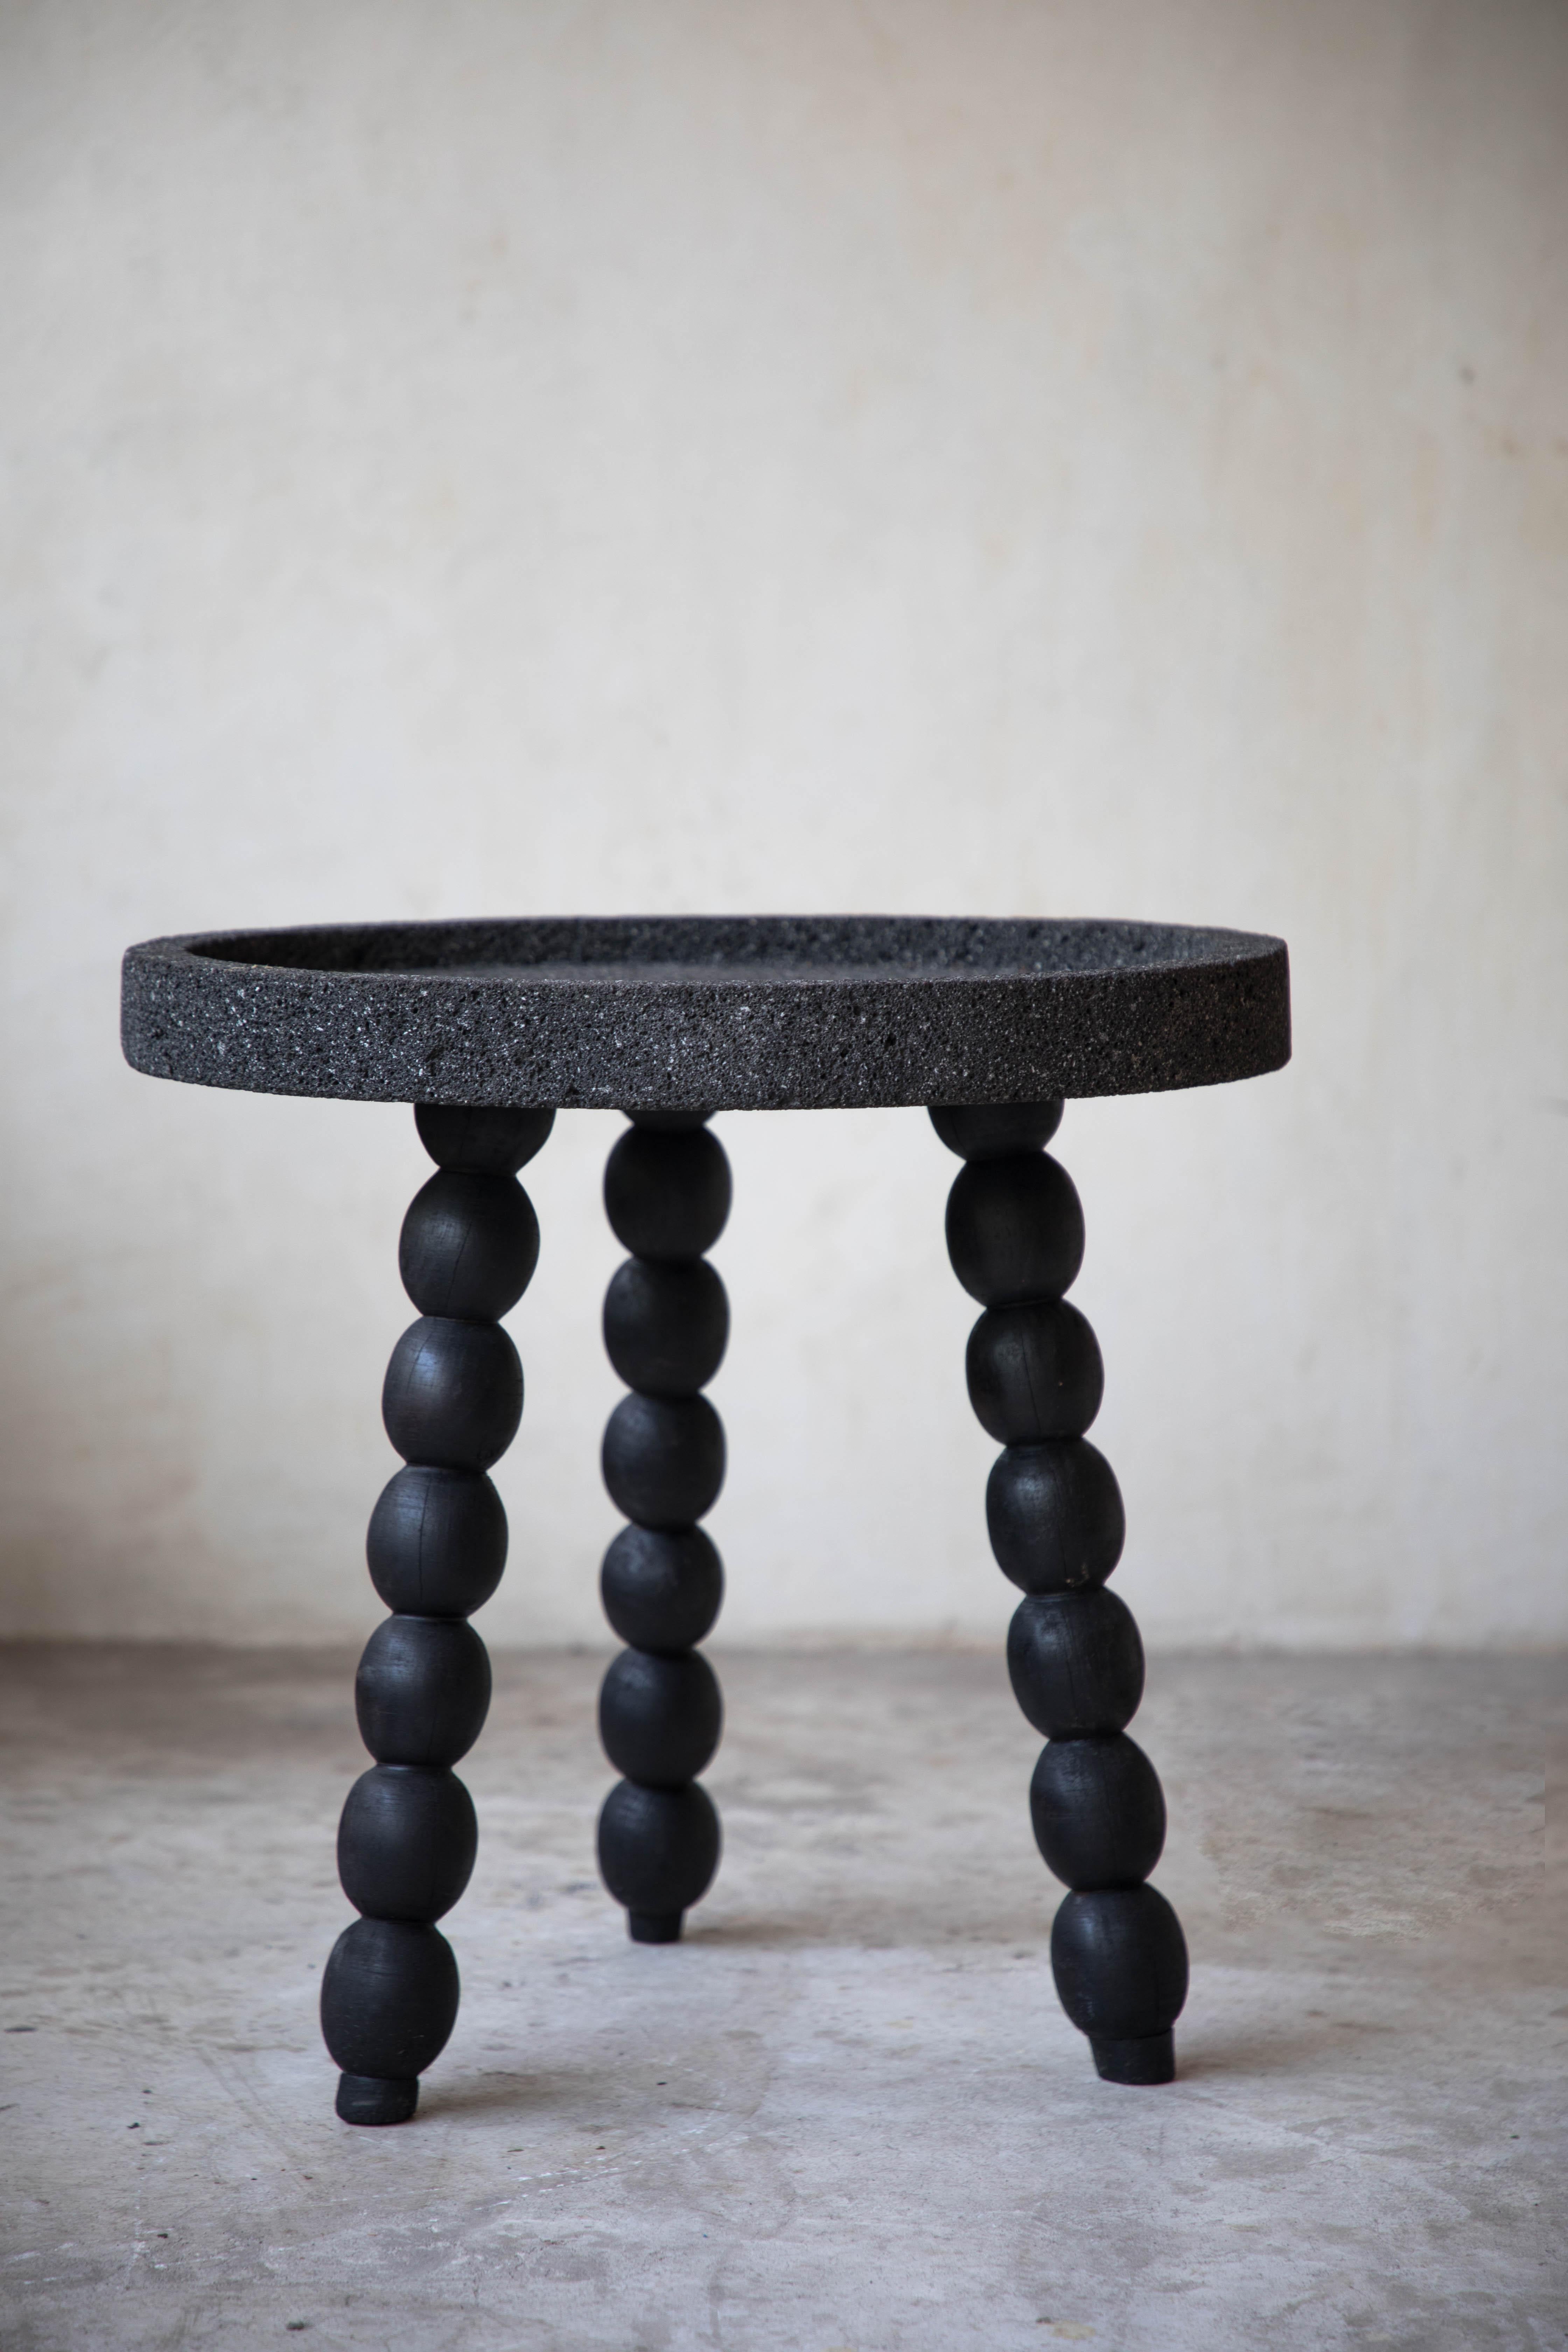 Wood and Concrete Sphere 3 legs totem by Daniel Orozco
Material: Solid wood.
Dimensions: D 35 x H 45 cm

Solid wood and concrete sphere 3 legs Totem, black finish. Handmade by Mexican artisans.

Daniel Orozco Estudio
We are an inclusive